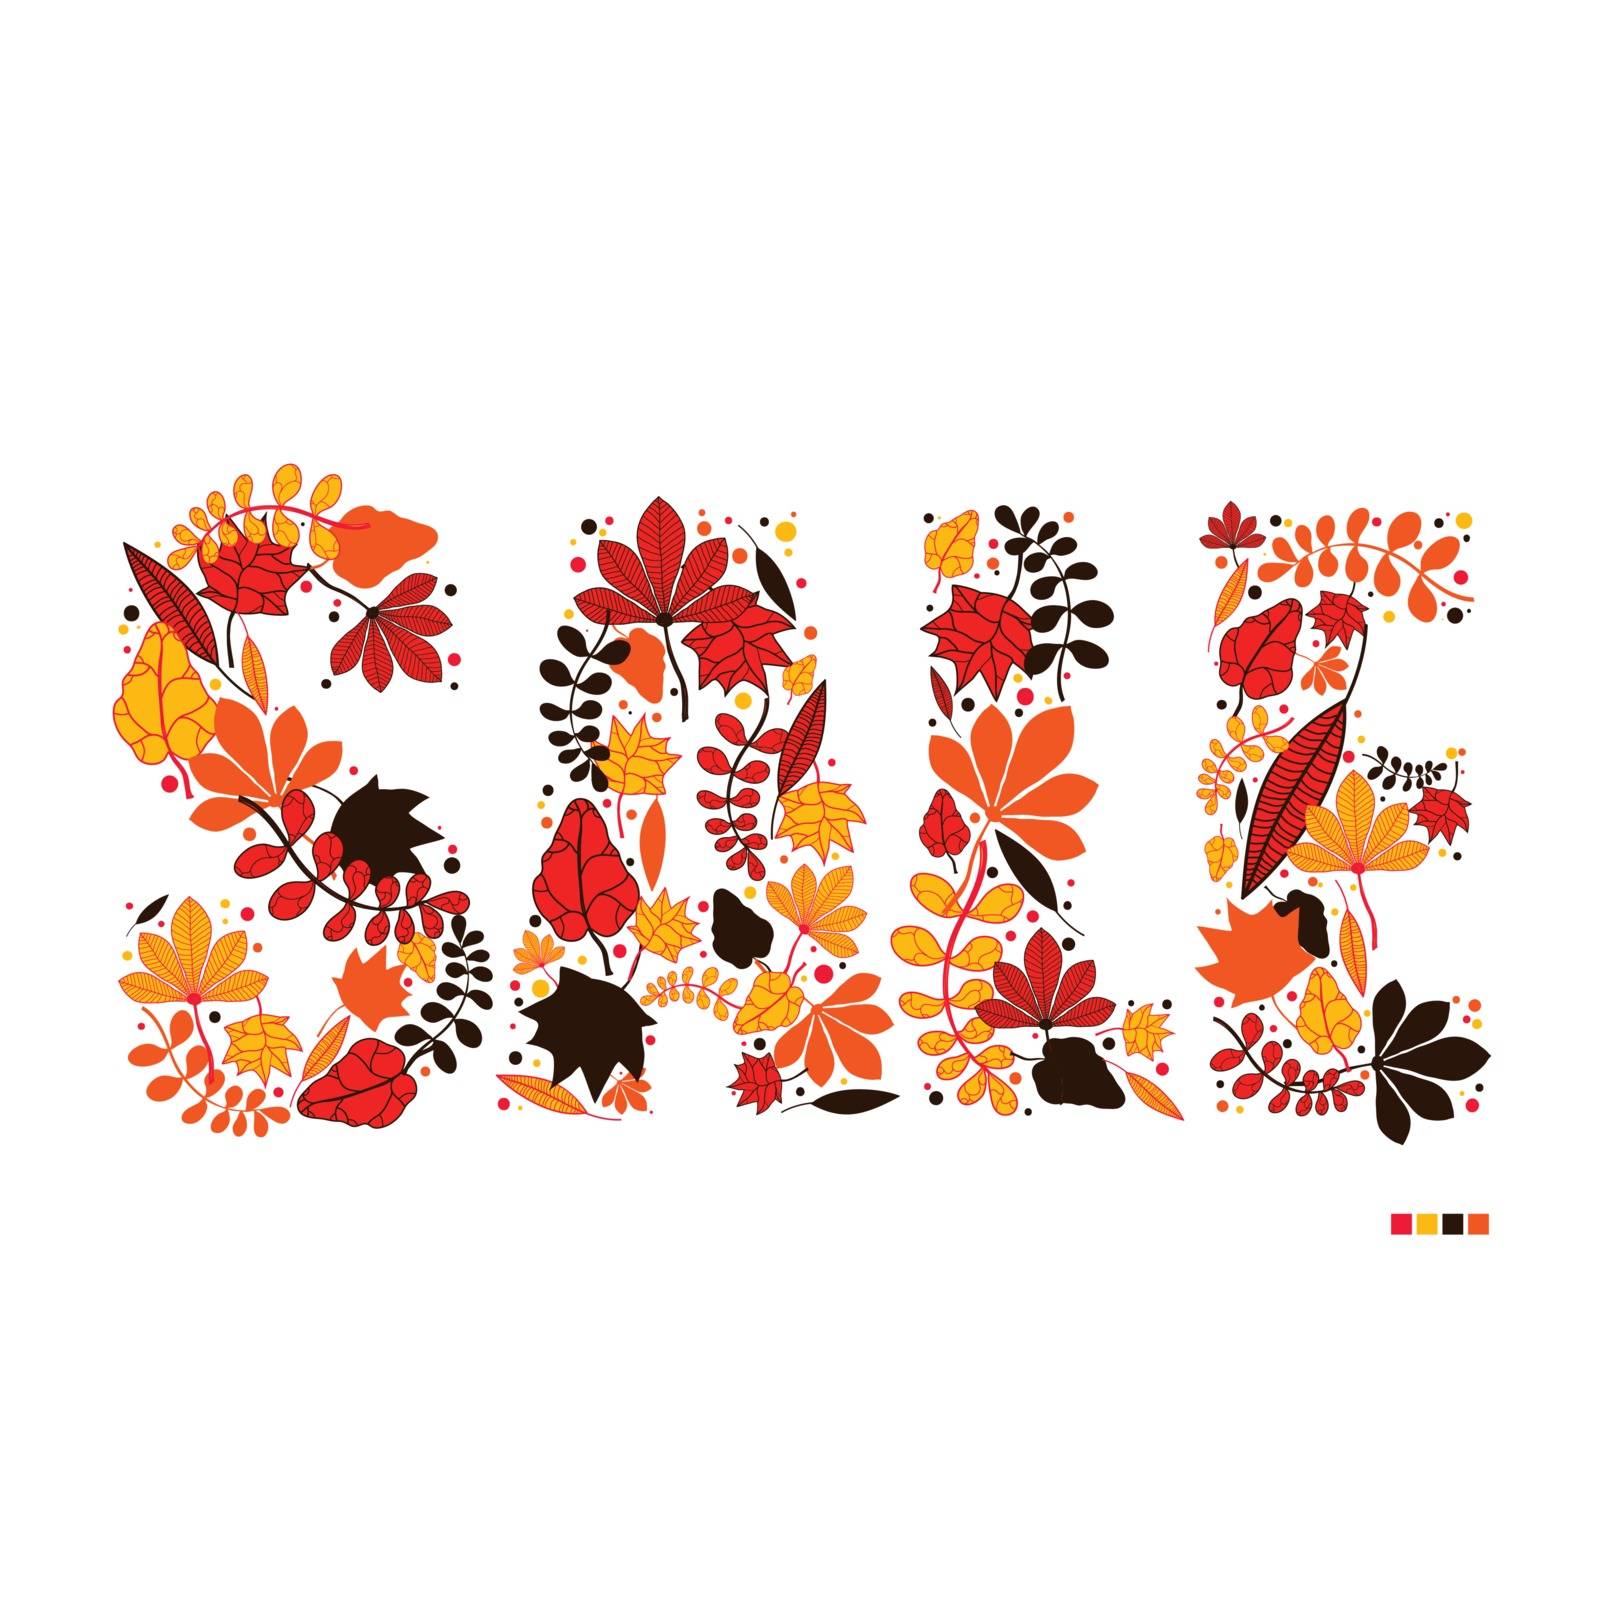 Word sale made of autumn leaves